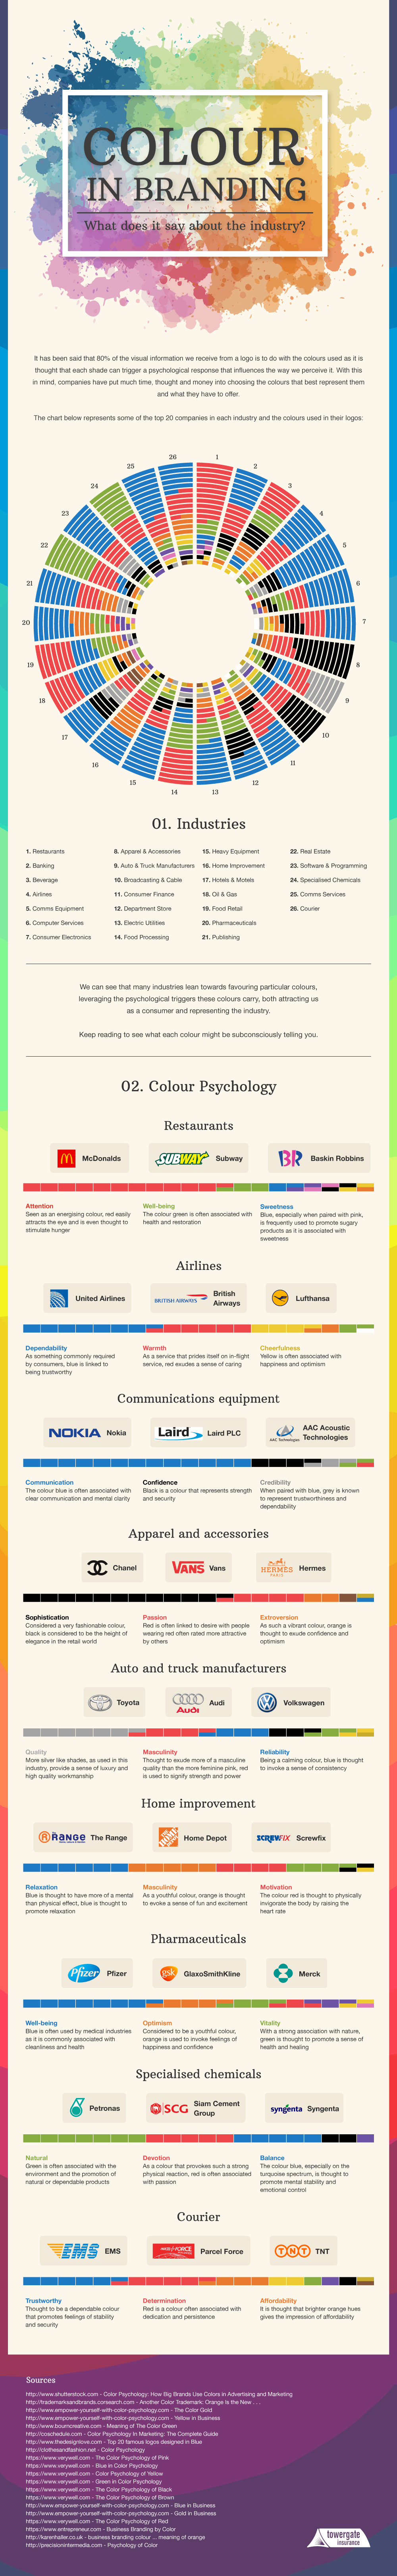 Color in Branding: What Does it Say About Your Industry?